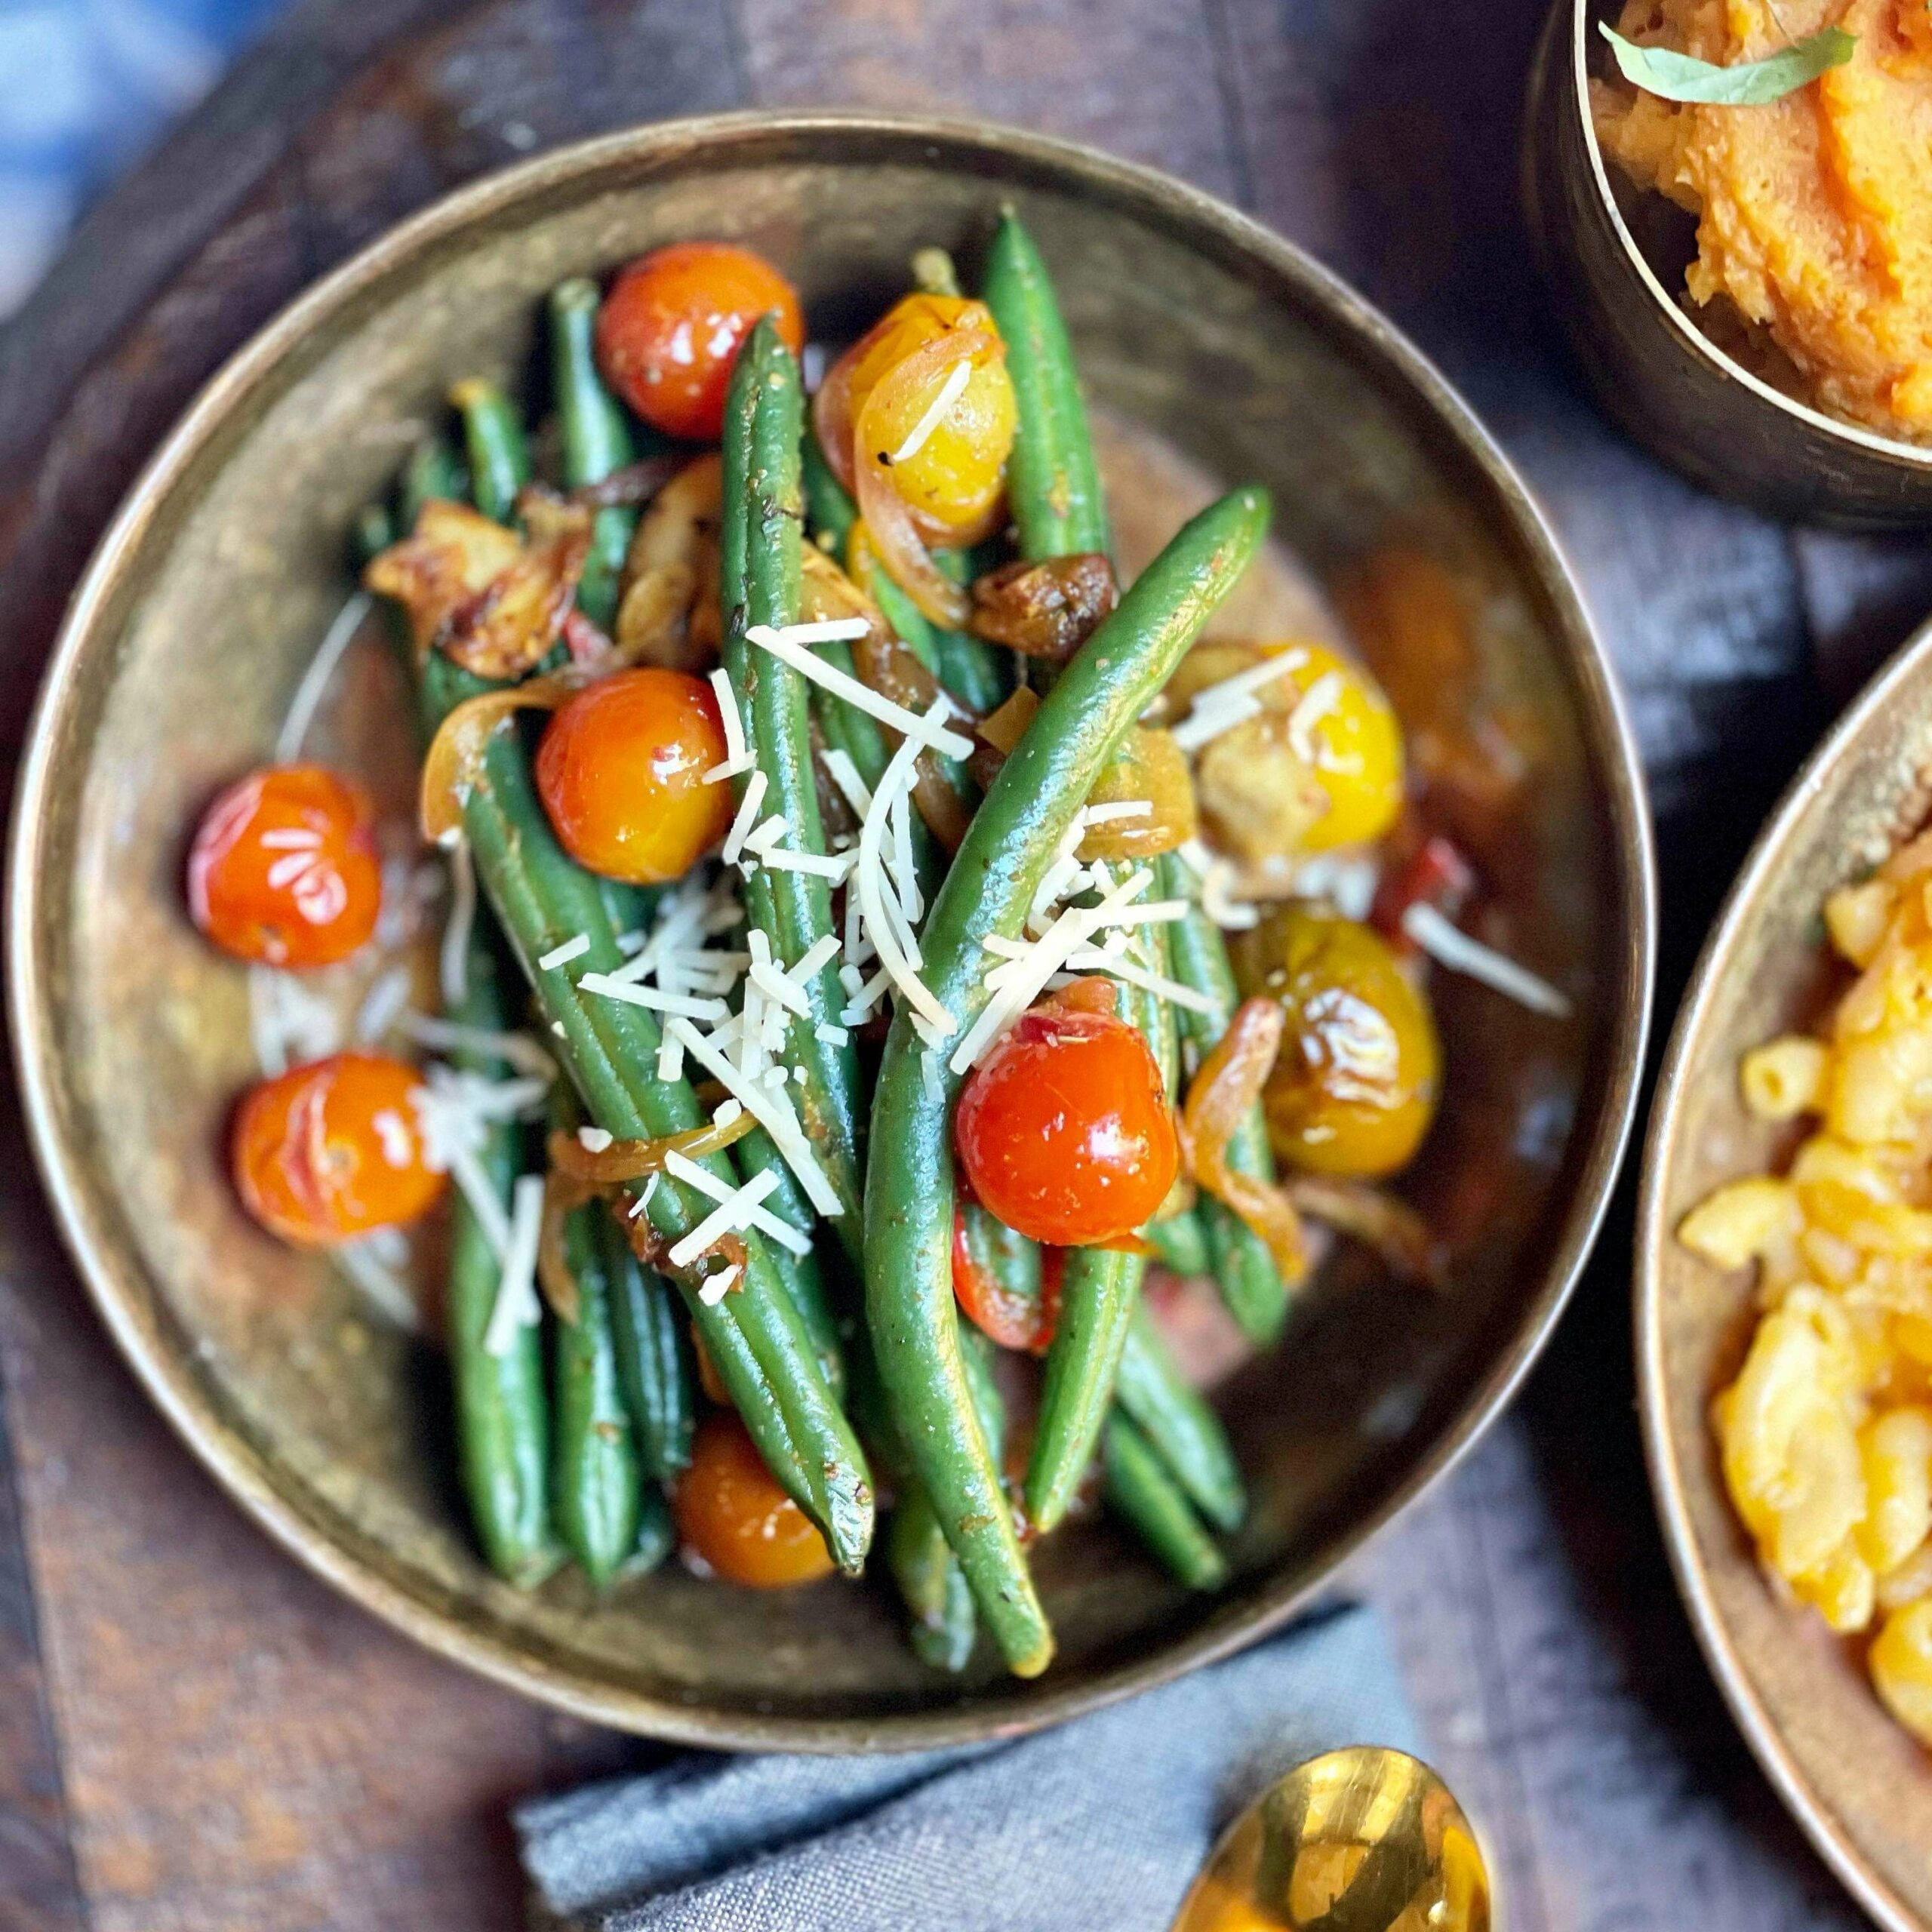 Green beans and tomatoes in a bowl on a wooden table.